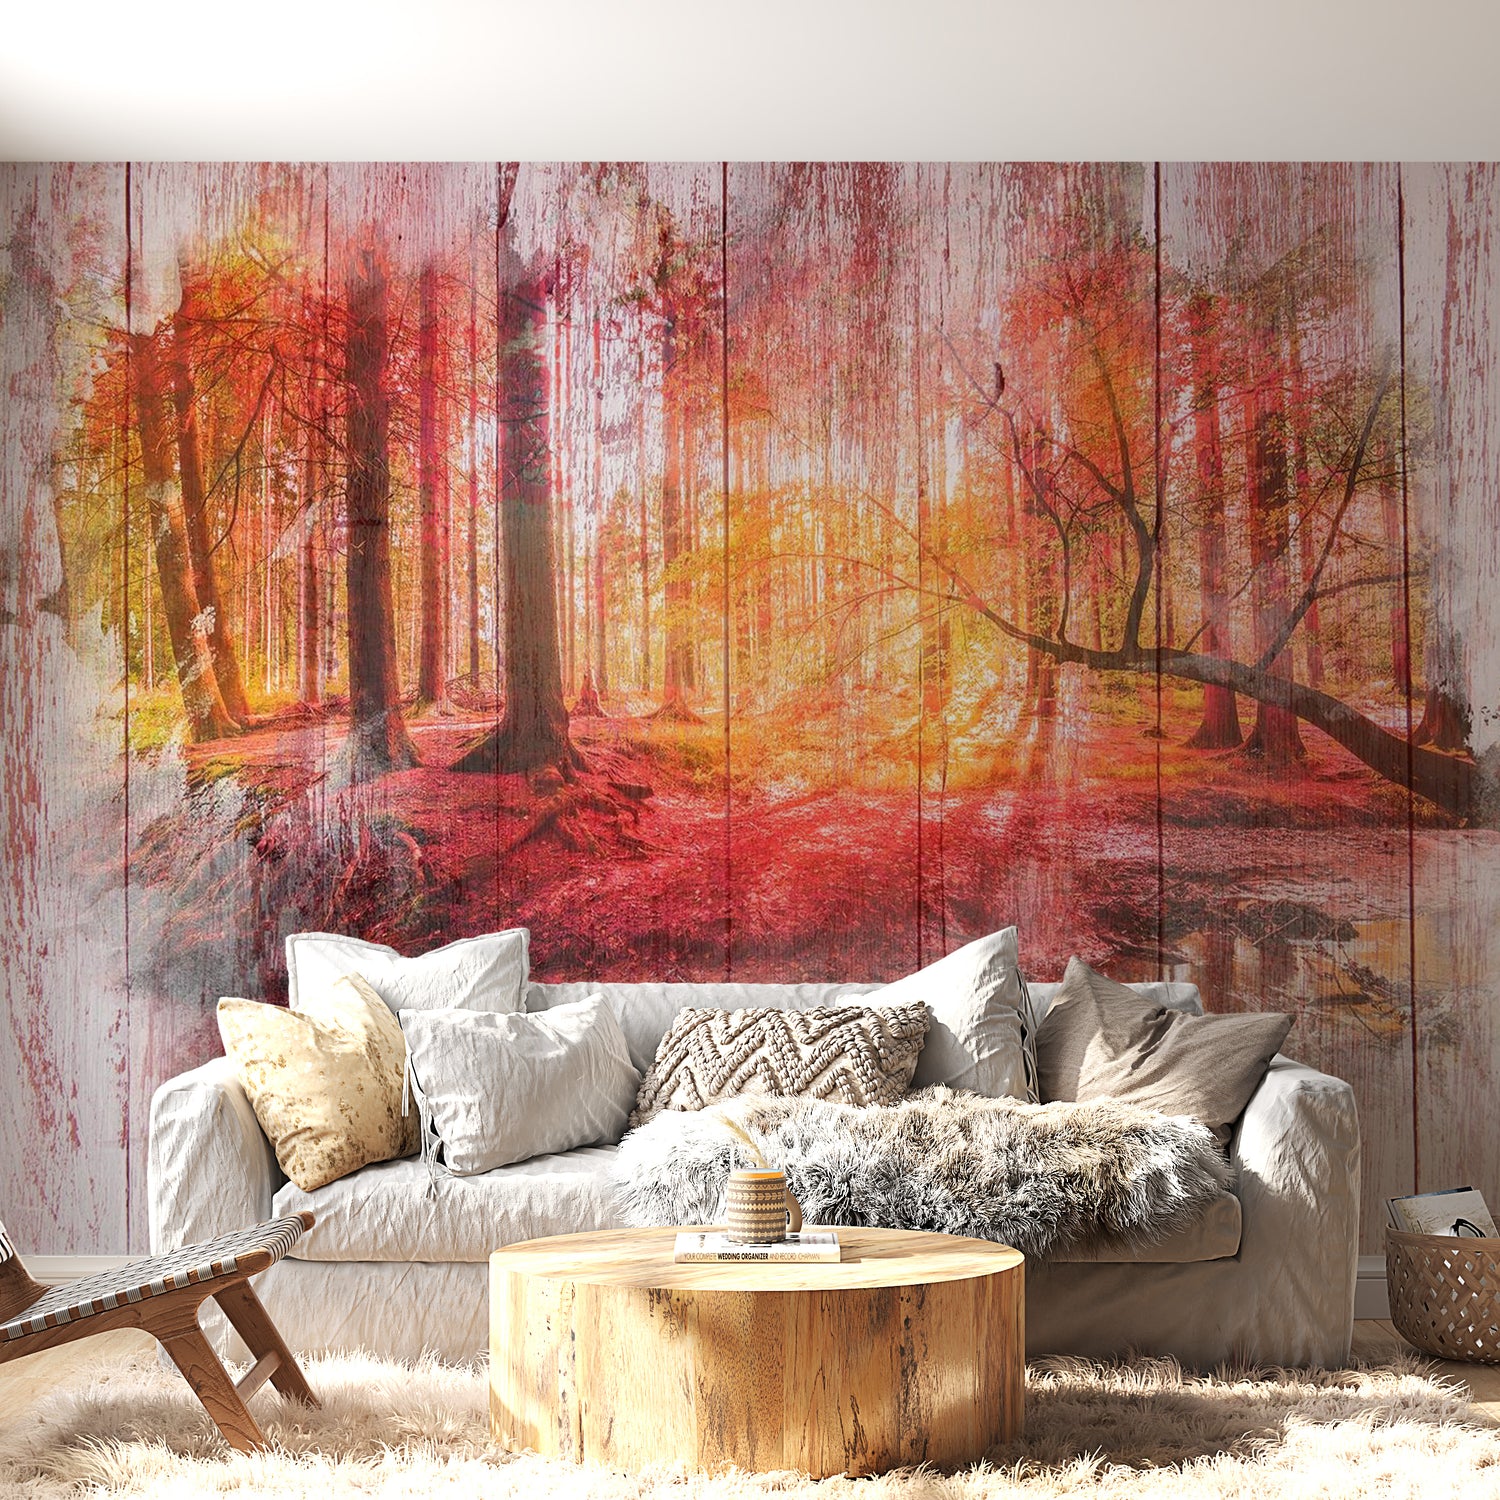 Peel & Stick Forest Wall Mural - Vintage Autumn Nature - Removable Wall Decals